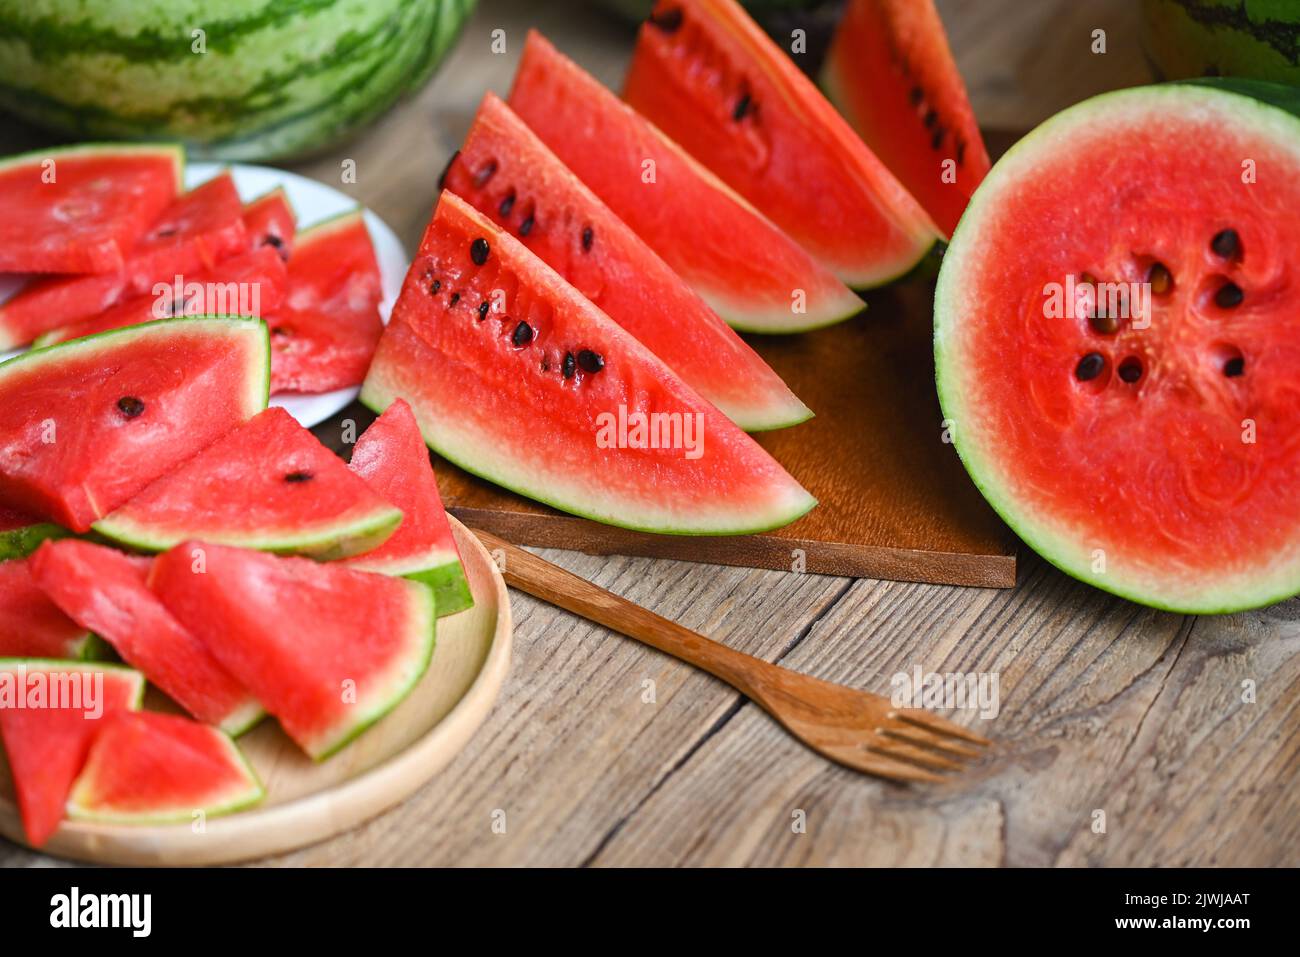 Watermelon slice and cut half on wooden background, Closeup sweet watermelon slices pieces fresh watermelon tropical summer fruit Stock Photo